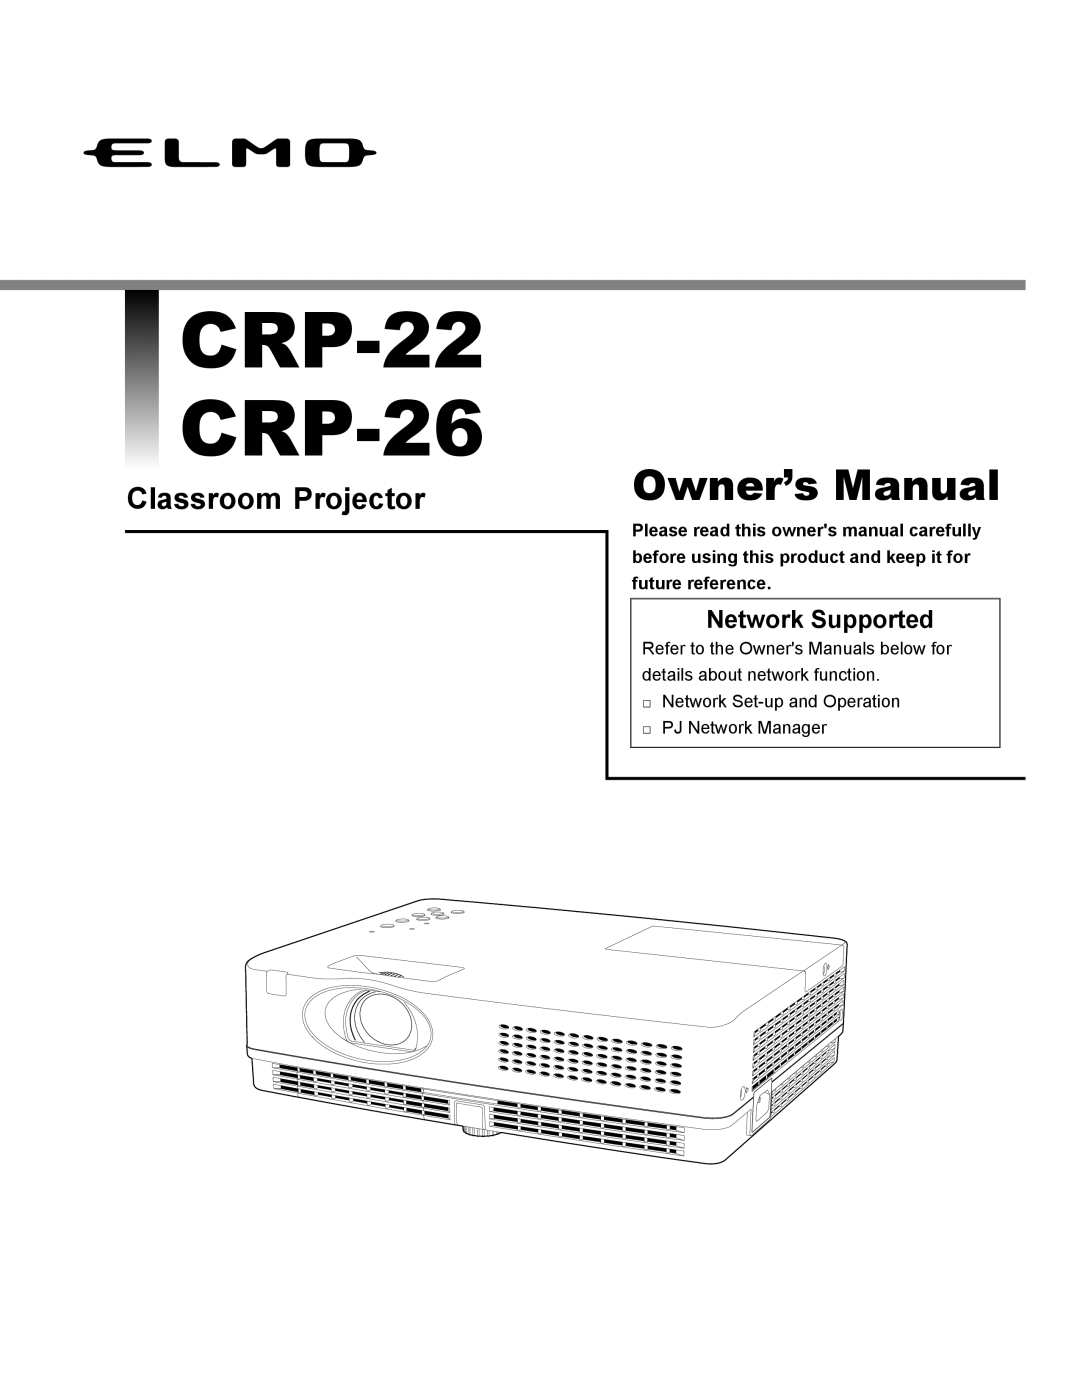 Elmo owner manual Network Supported, CRP-22 CRP-26, Owner’s Manual, Classroom Projector 